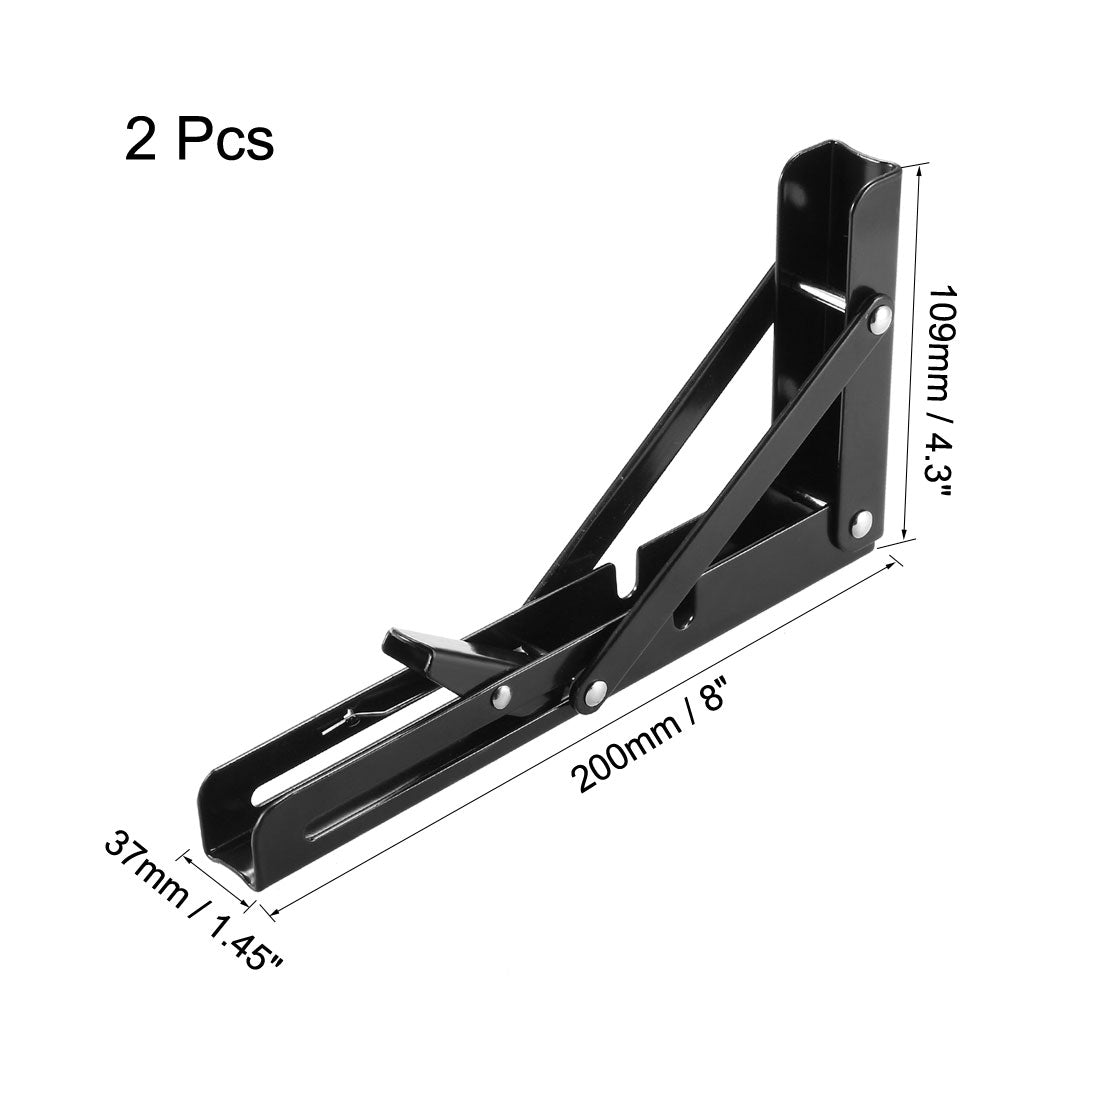 uxcell Uxcell Folding Bracket 8 inch 200mm for Shelves Table Desk Wall Mounted Support Collapsible Long Release Arm Space Saving Carbon Steel 2pcs